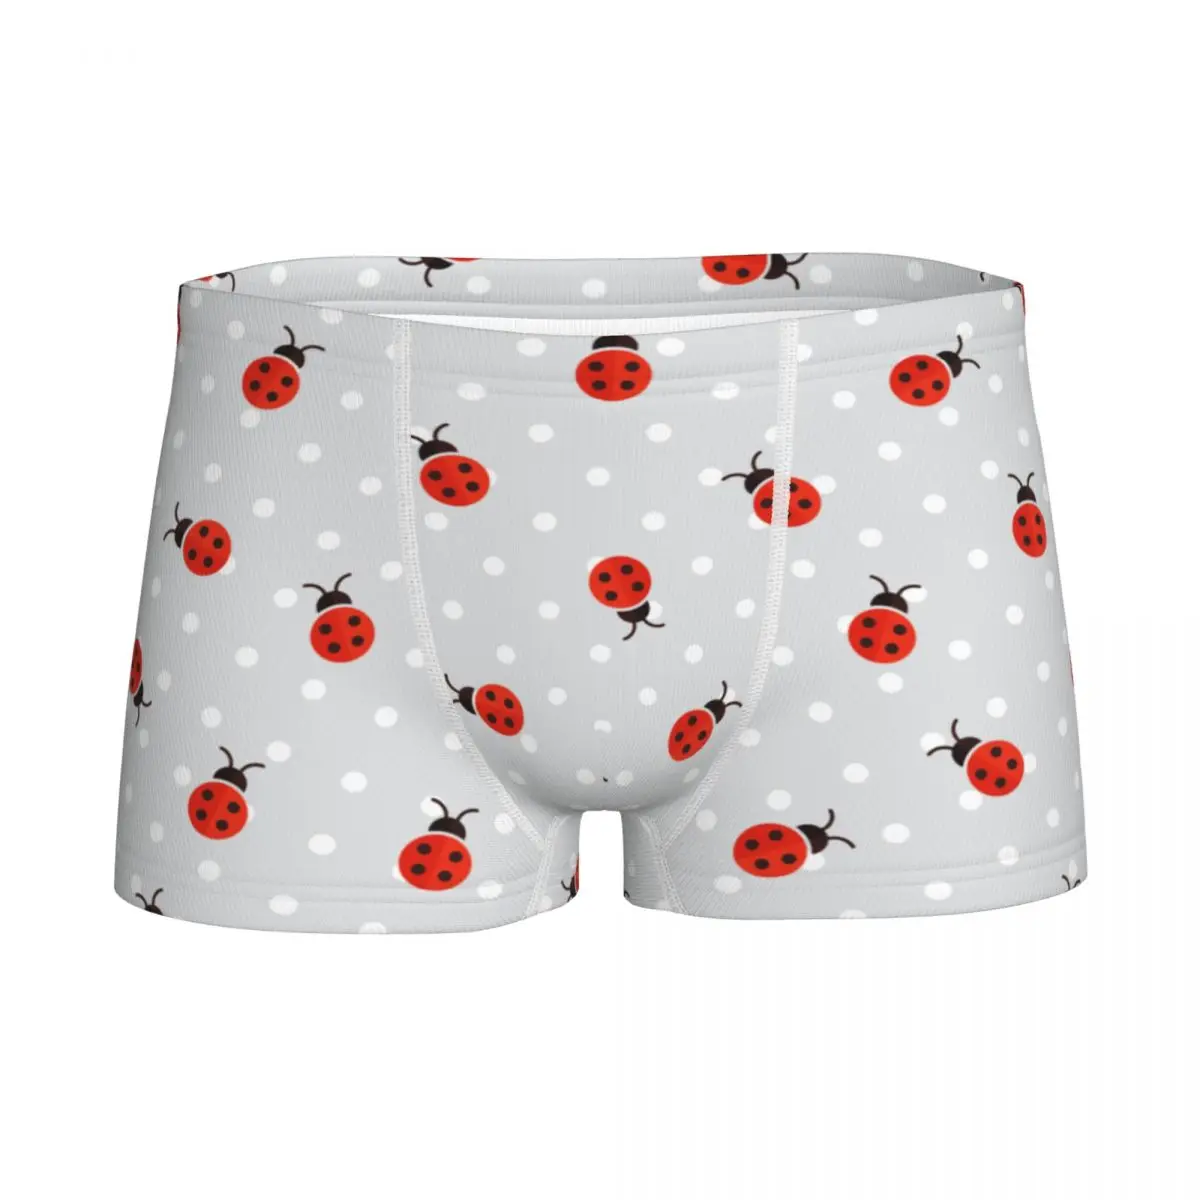 

Ladybug Ladybird Insect Lover Boys Underwear Children Kids Baby Boxer Brief Panties Soft Briefs Male Breathable Panties